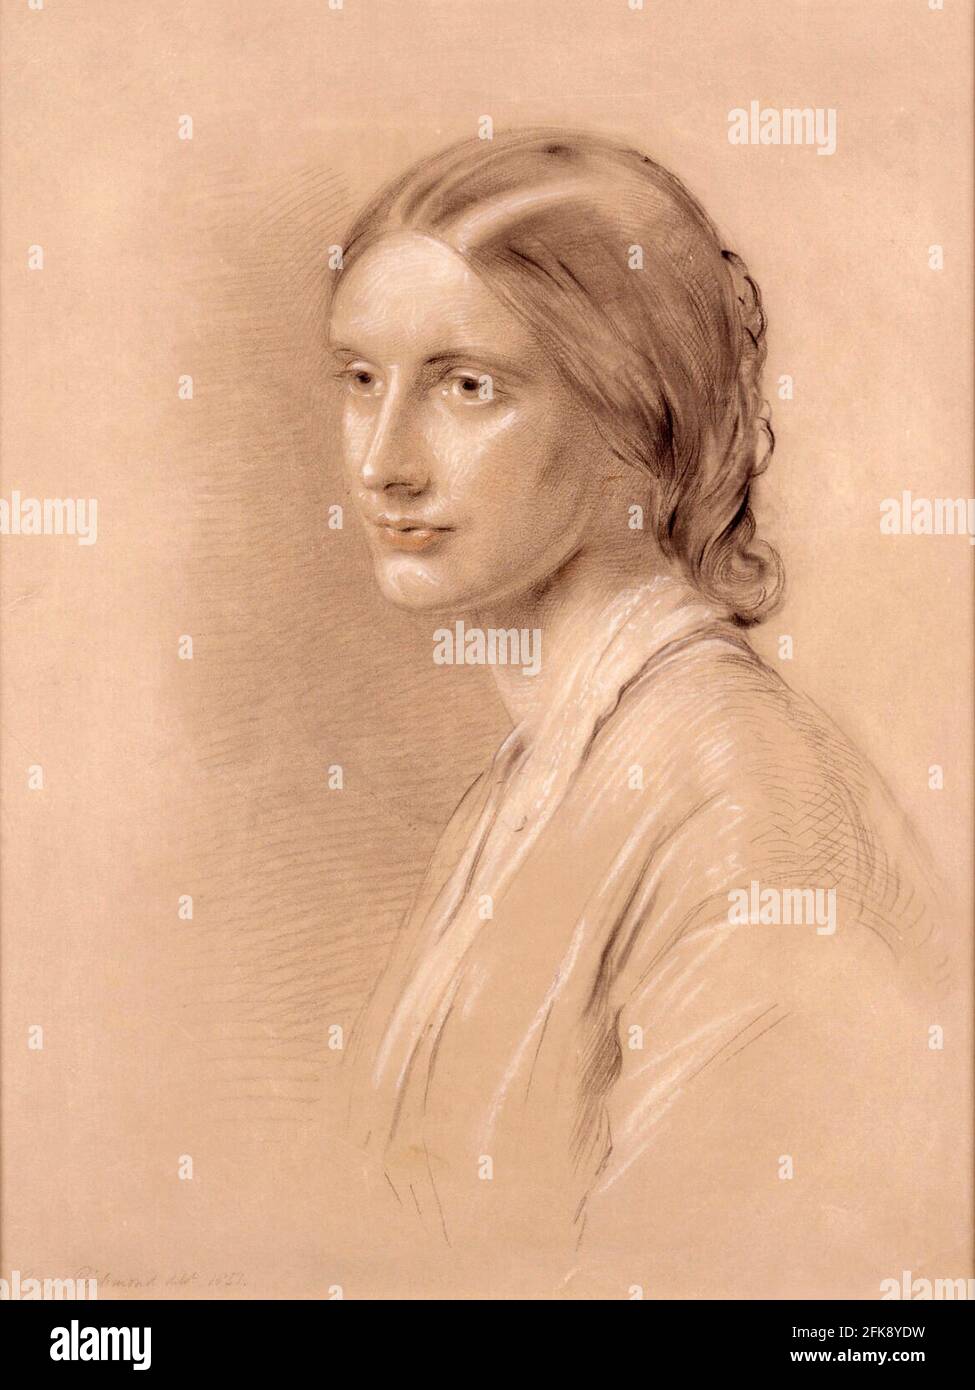 Josephine Butler. Portrait of the English social reformer and feminist, Josephine Elizabeth Butler (née Grey, 1828-1906), by George Richmond, pastels, 1851 Stock Photo